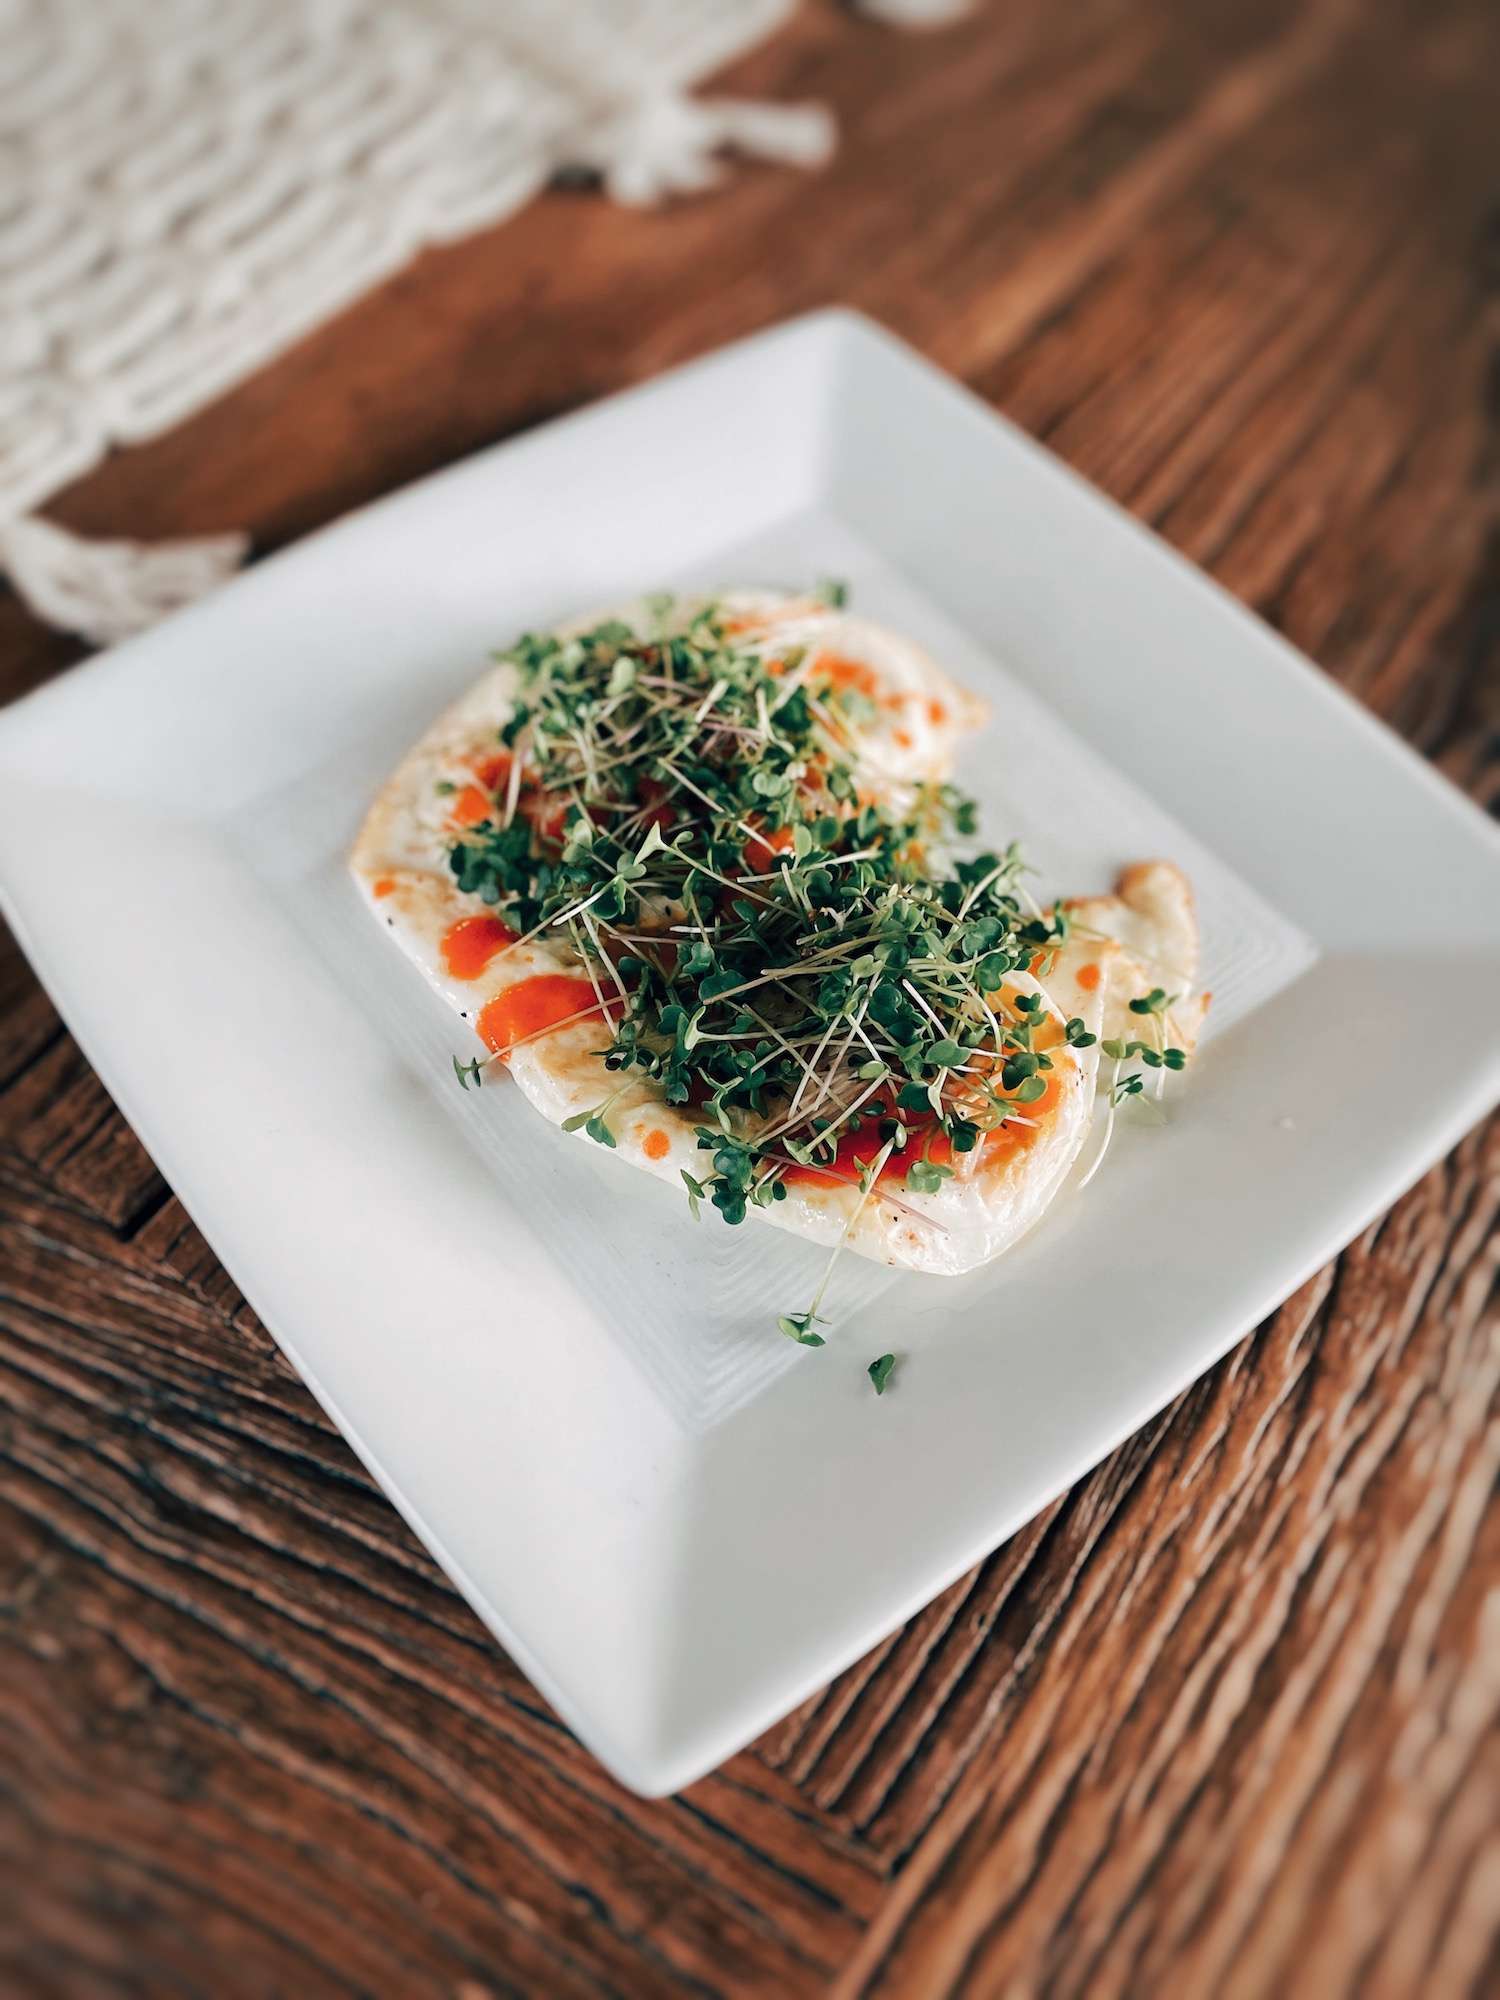 Broccoli microgreens piled on top of a white plate of over-easy eggs